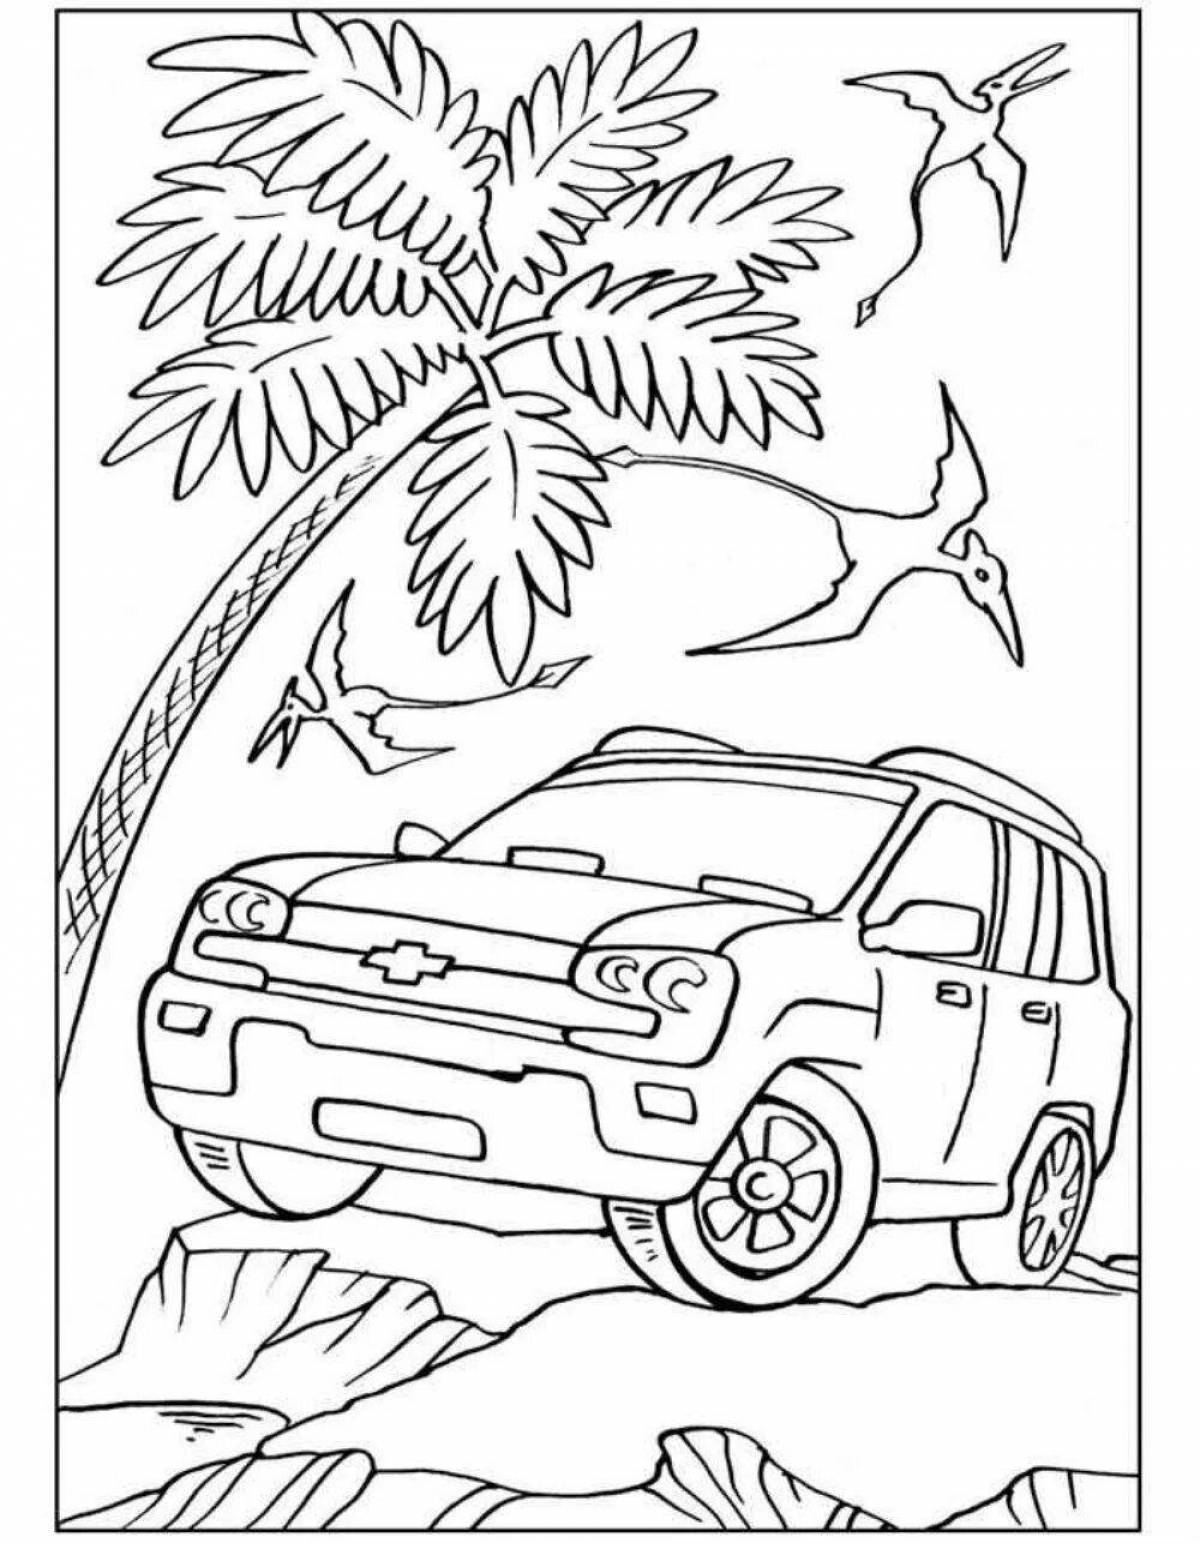 Coloring book for boys 8-9 years old